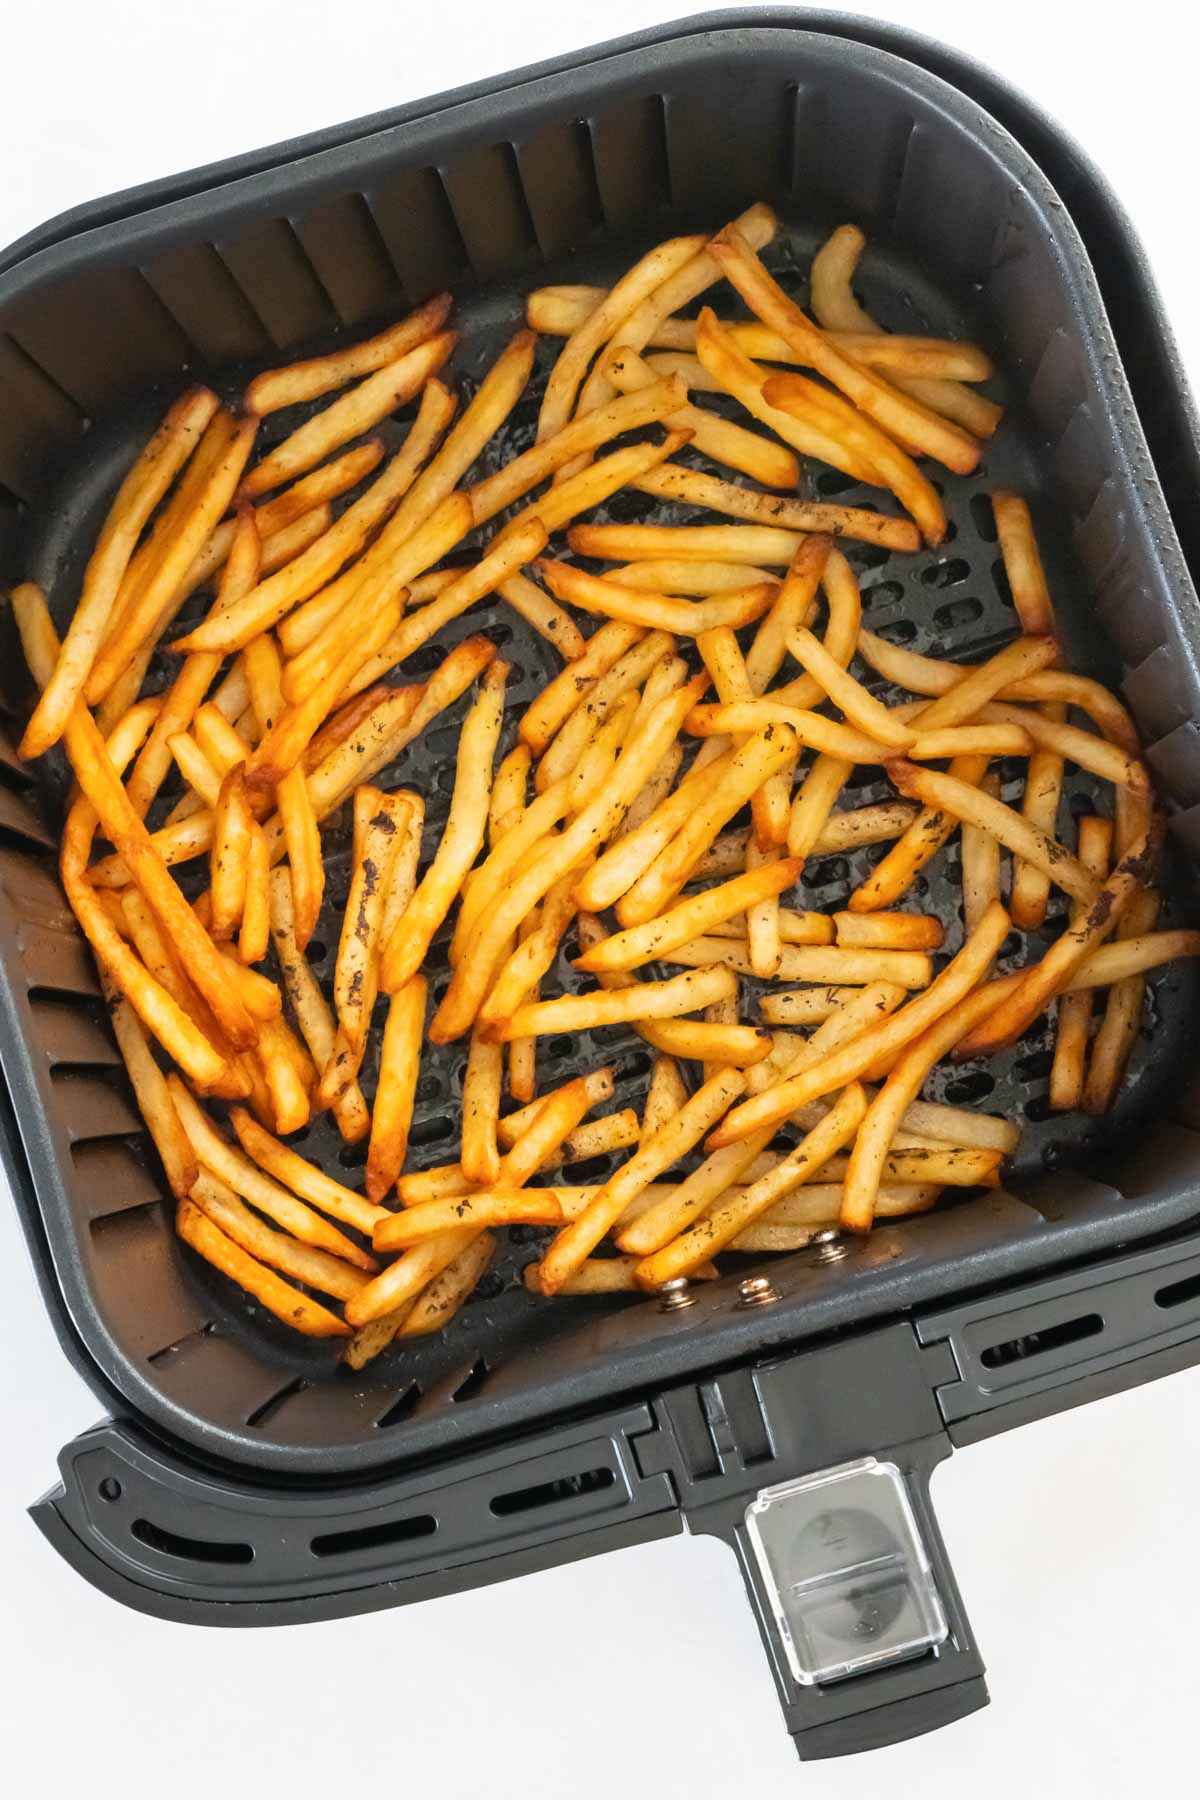 Cooked frozen french fries in air fryer basket.